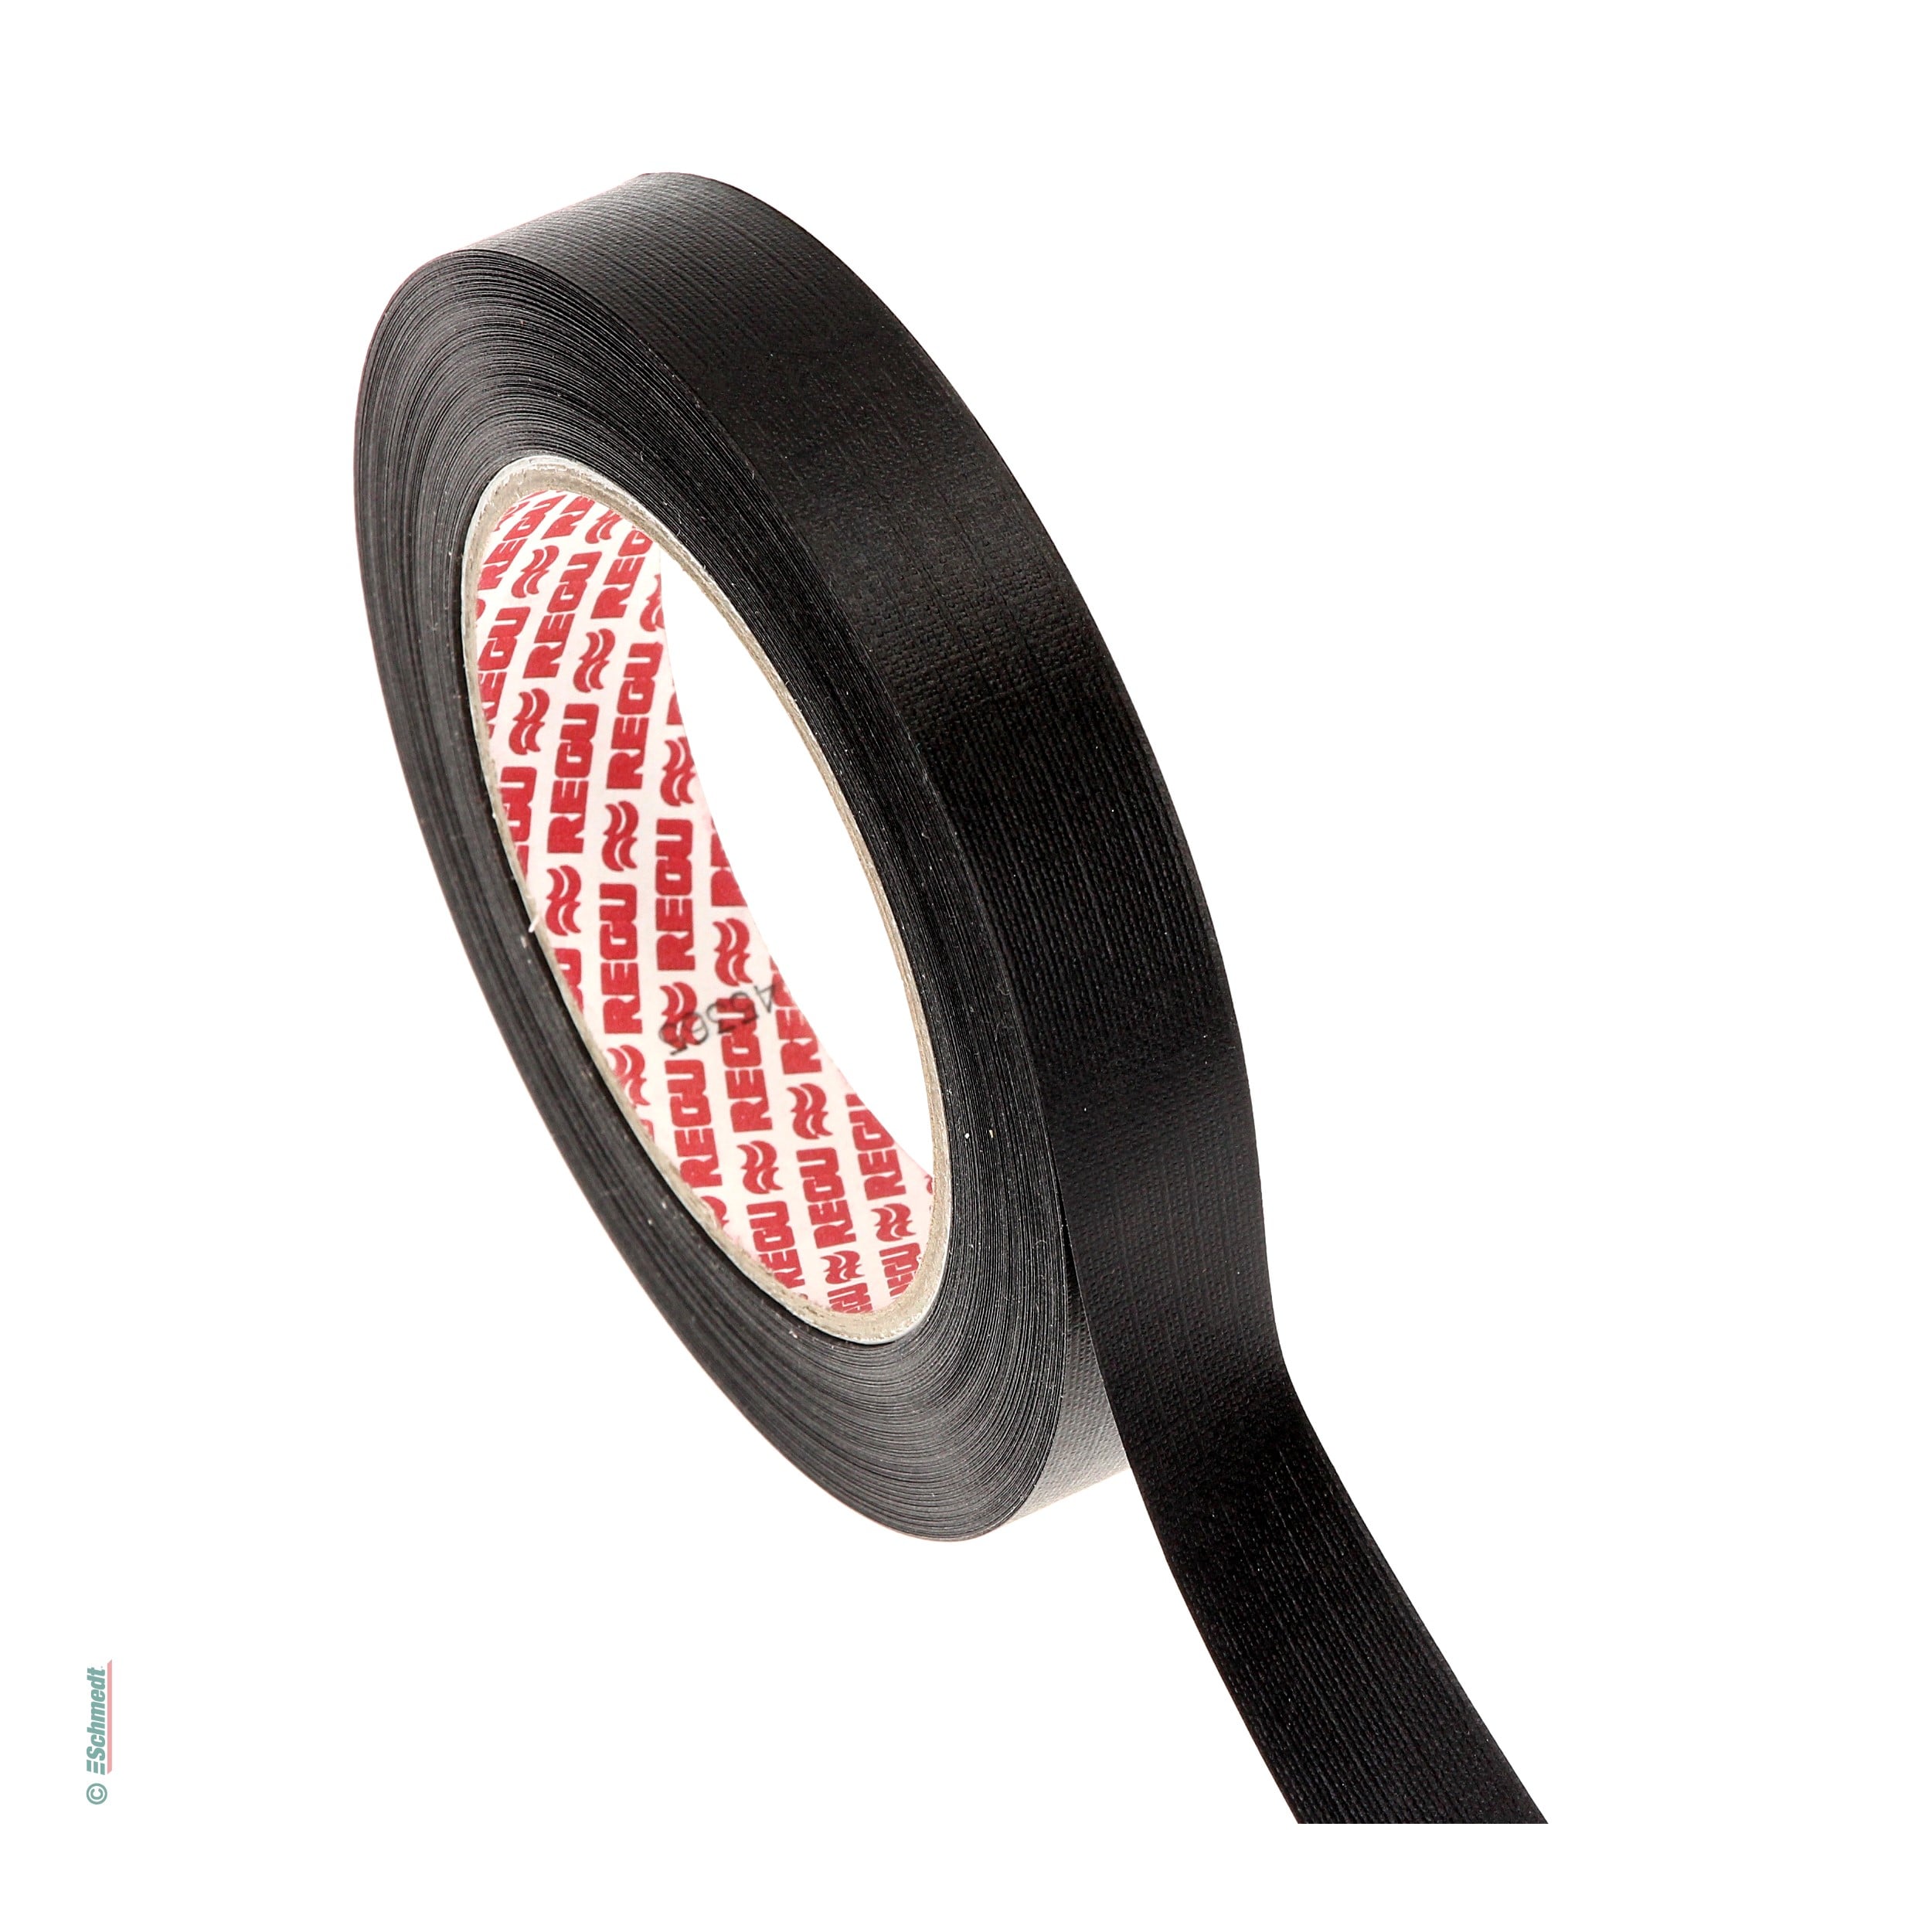 Regutaf H3 - self-adhesive spine-binding tape - Width (in mm) 30 - Colour black - to reinforce the spine of pre-glued or stapled brochures, ...